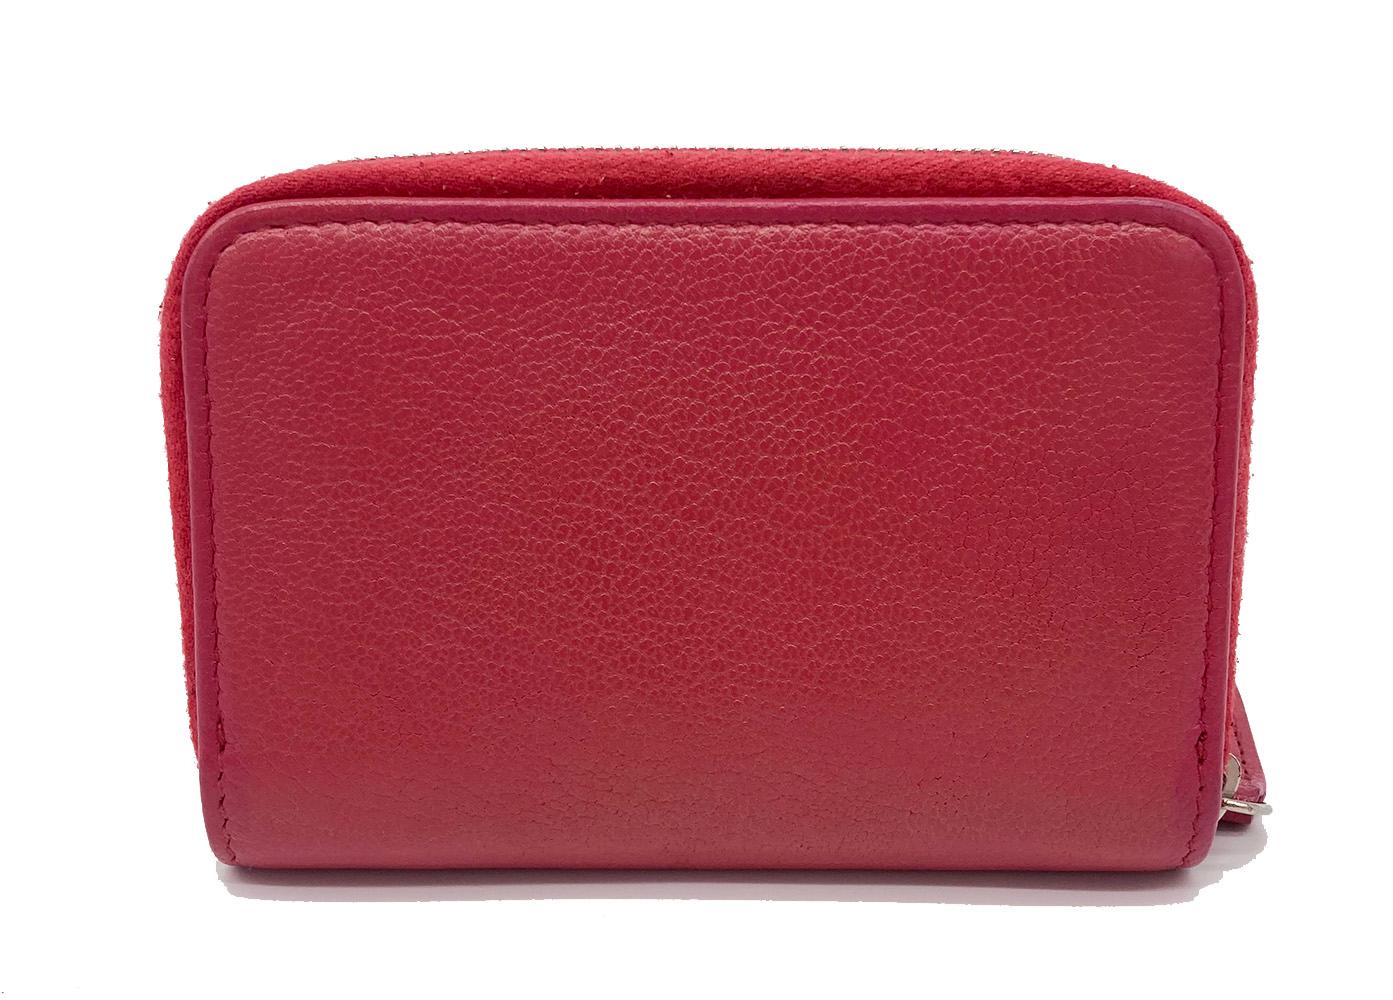 Coral pink leather with zip around sides and small cc enamel logo along front side. 3 interior card compartments lined in floral fabric. no stains smells or scuffs. clean corners edges and interior. measurements: 4.25